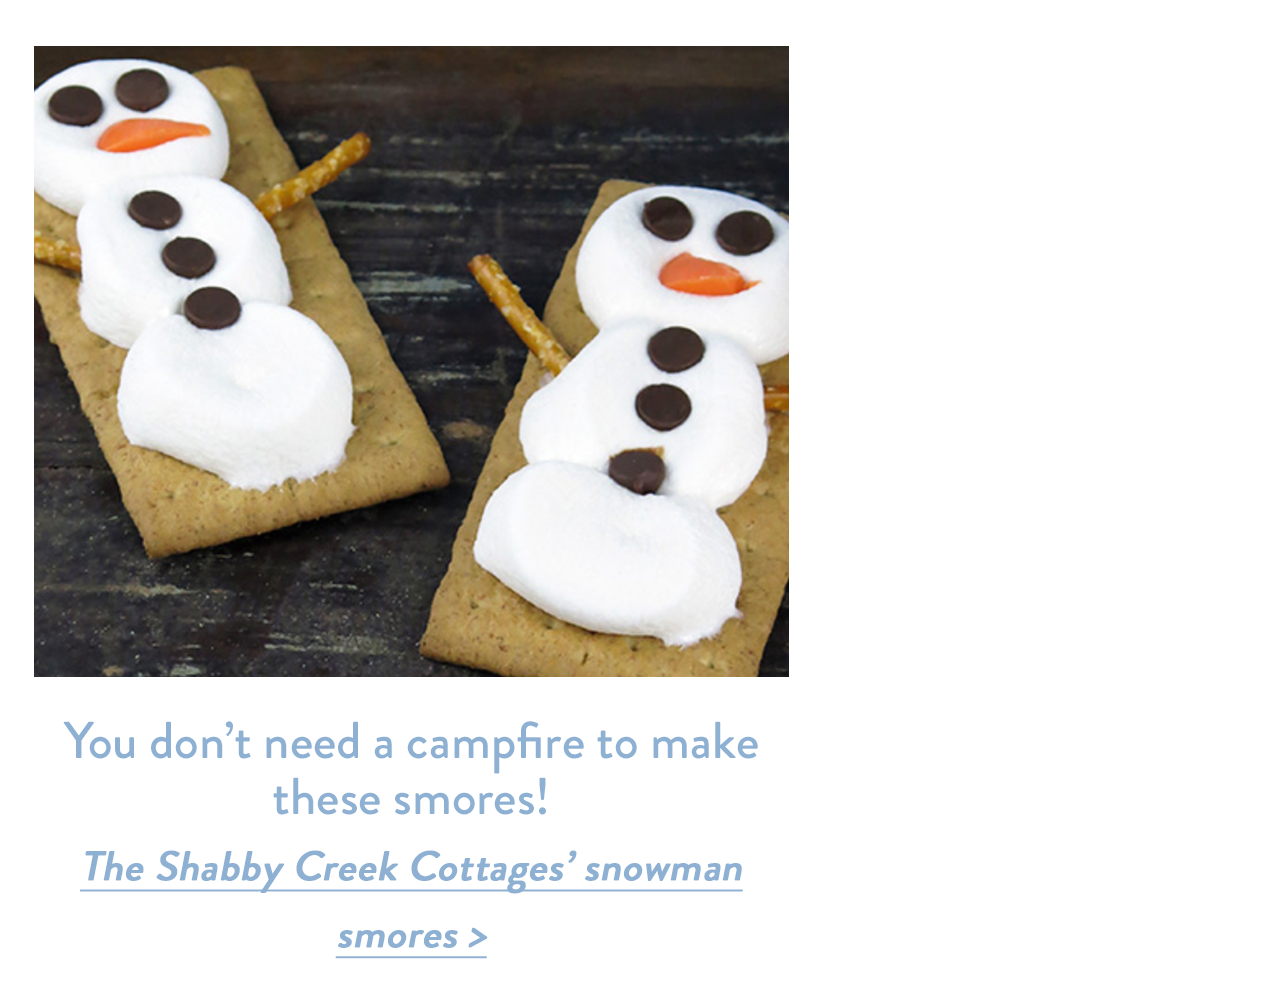 You don't need a campfire to make these smores!